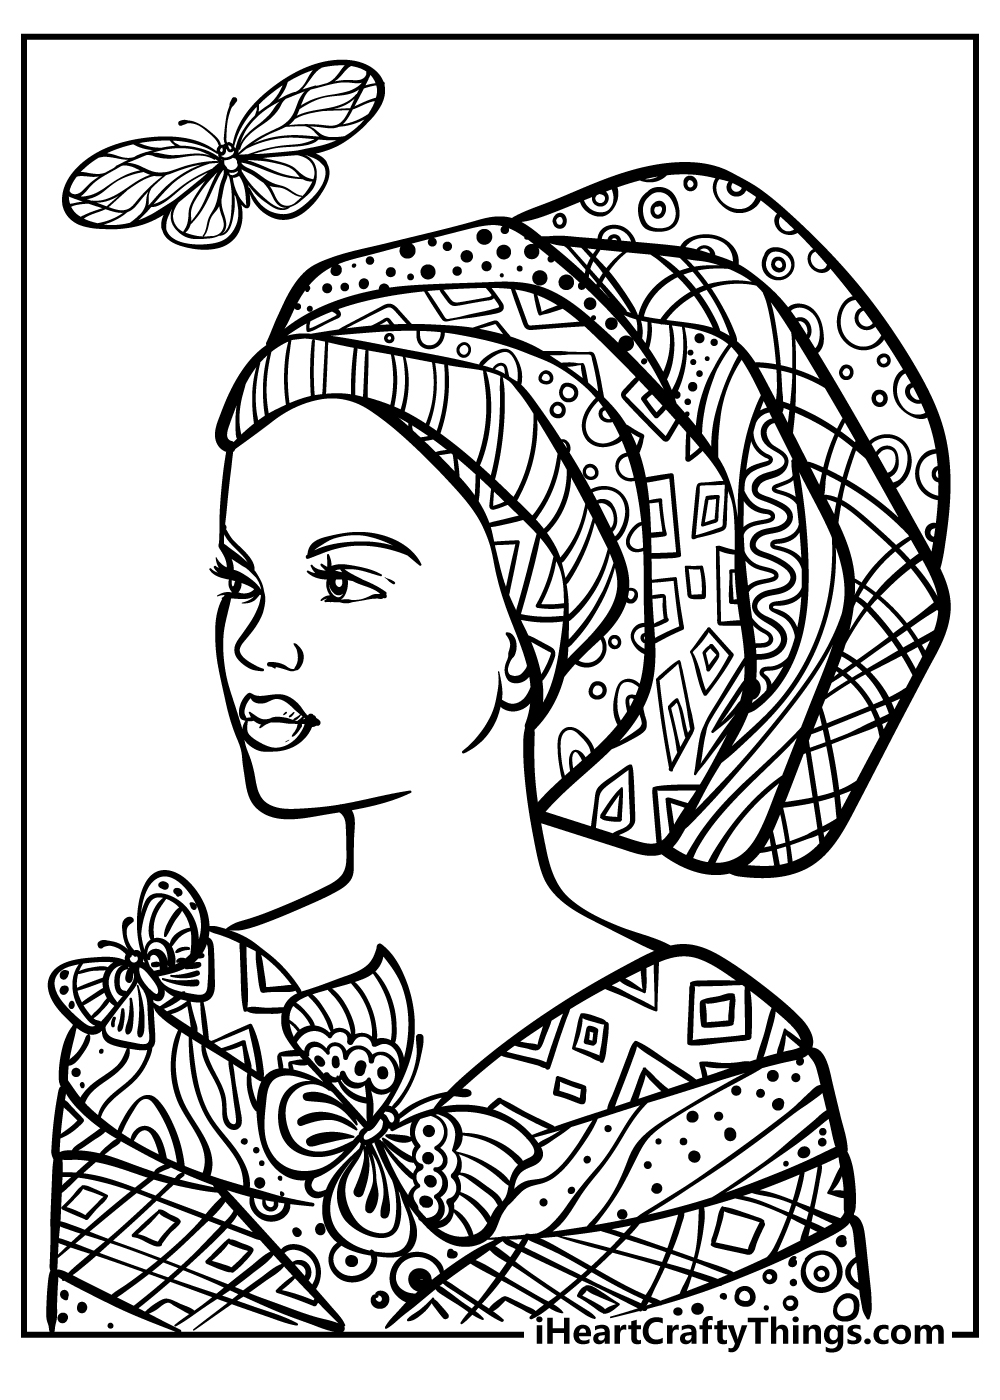 Adult Coloring Pages free download